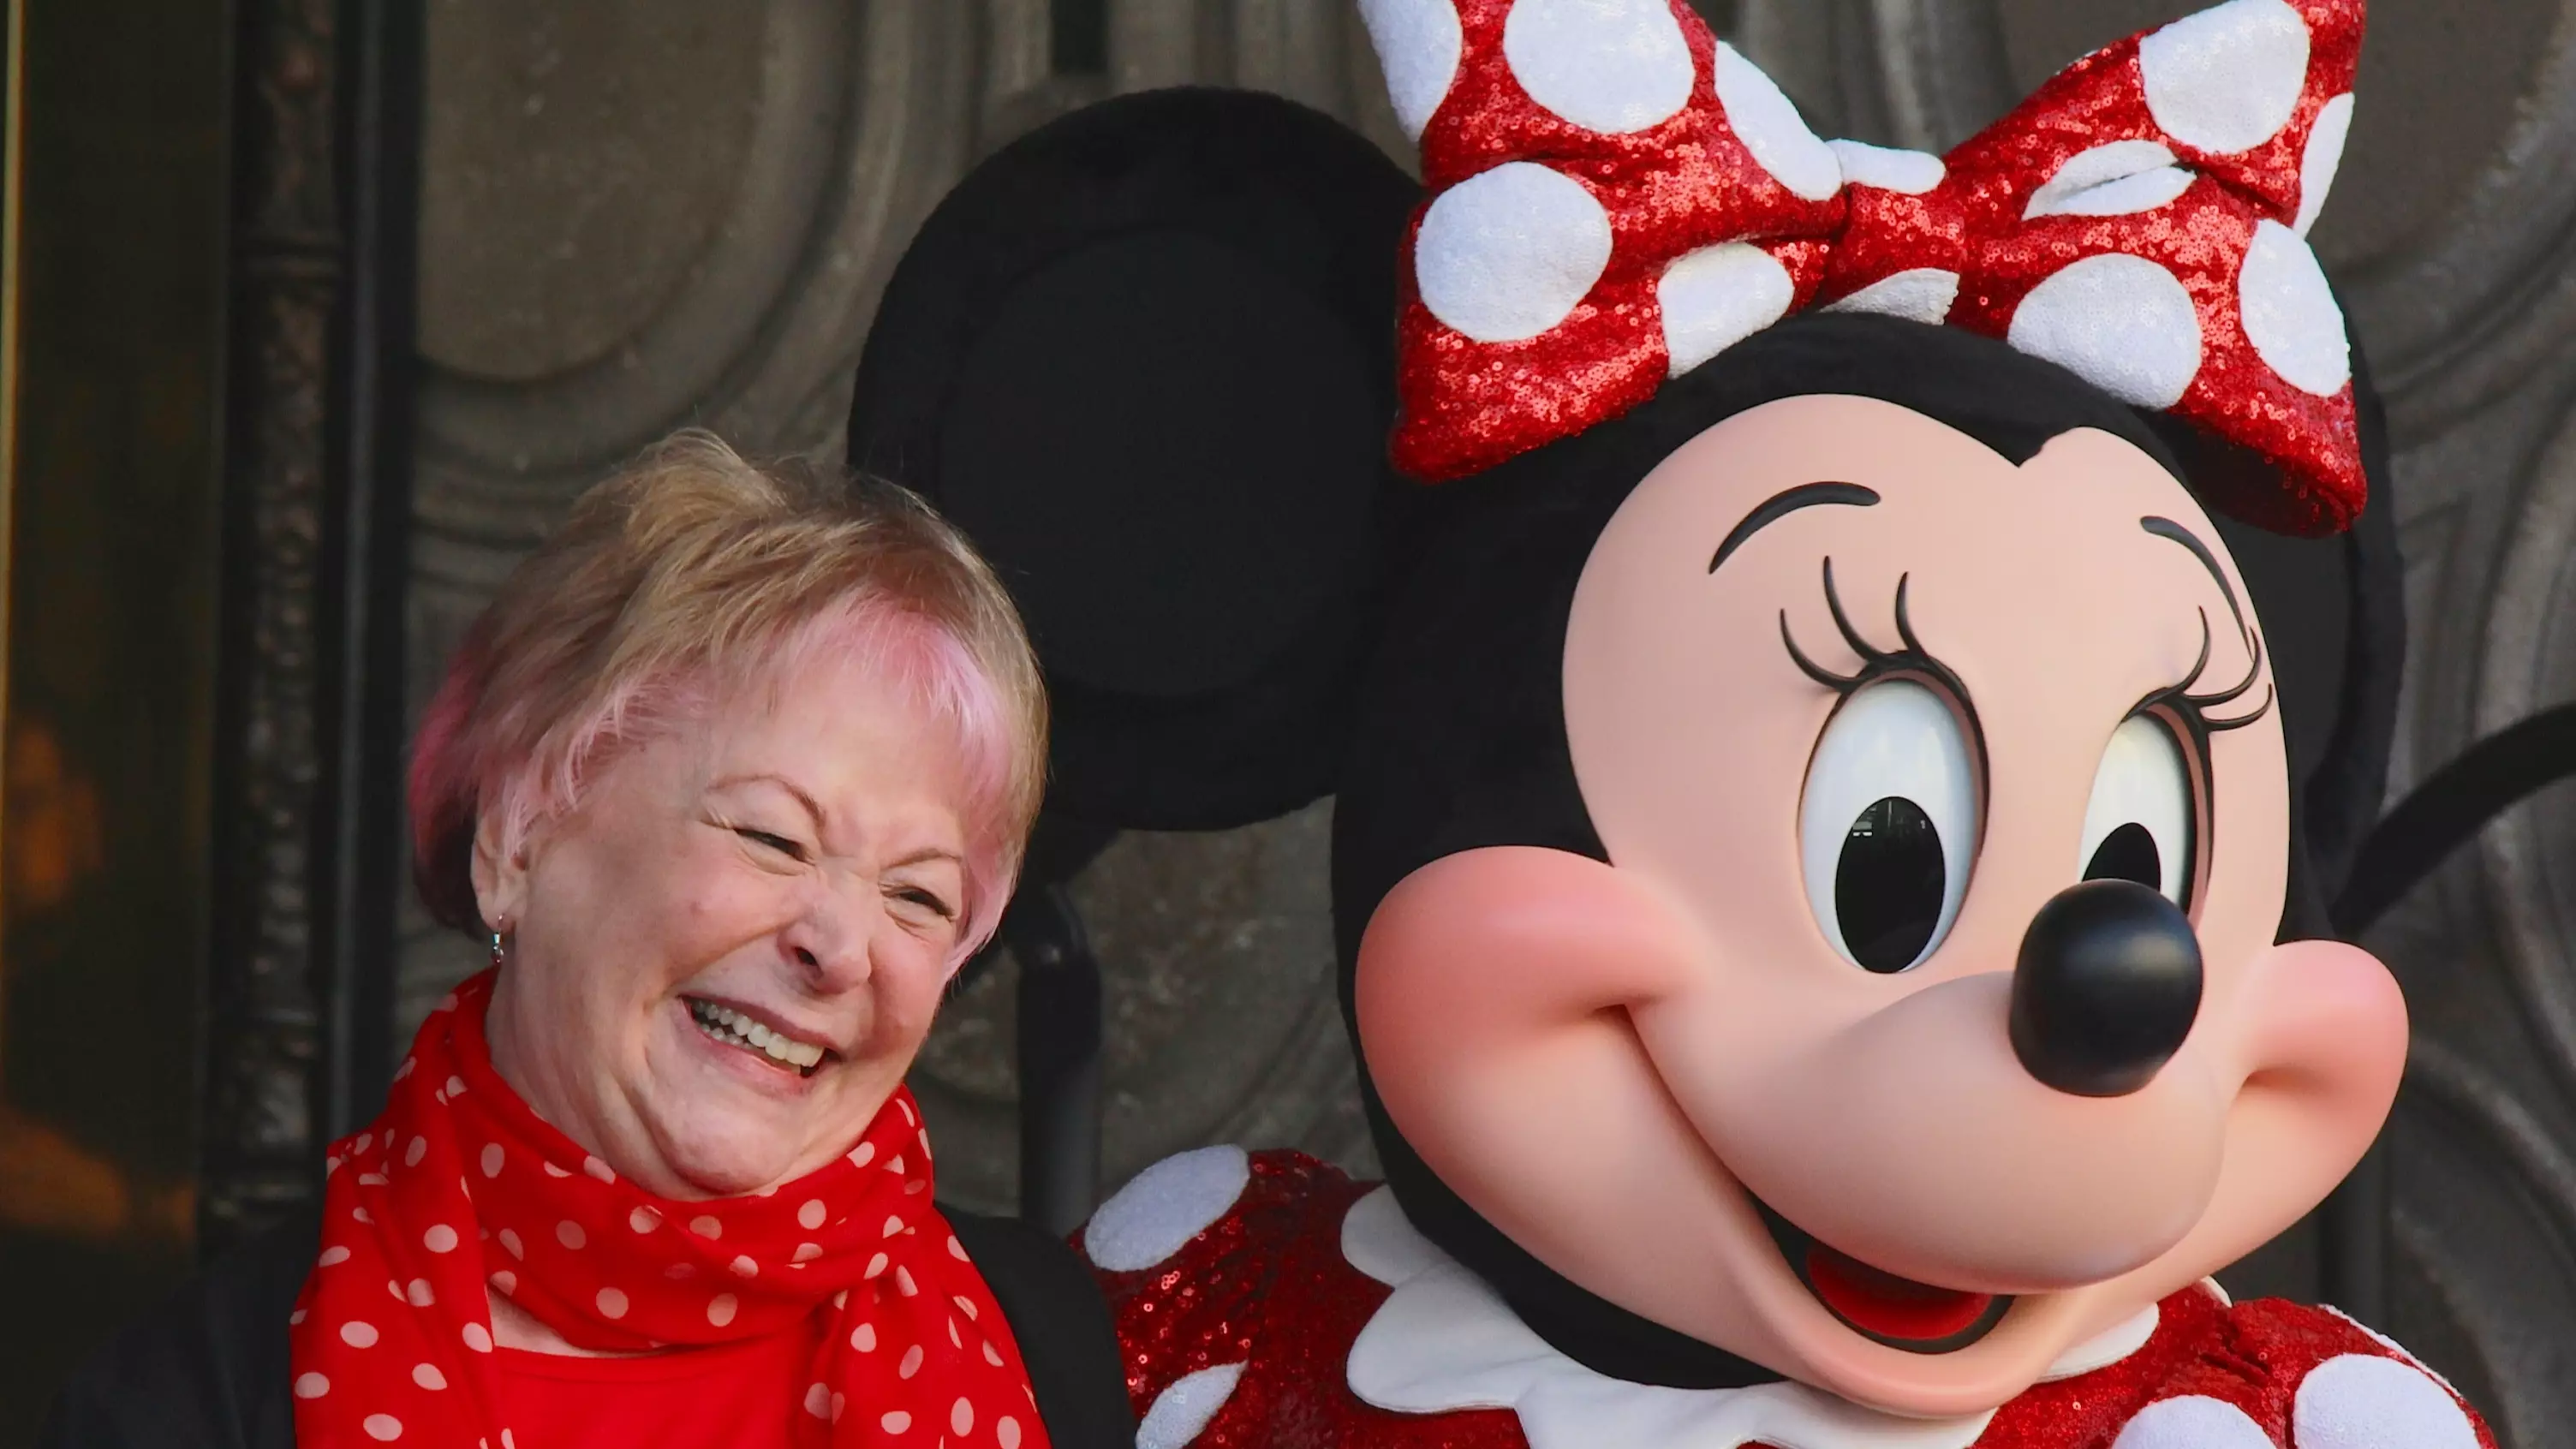 Disney's Minnie Mouse Voice Actor Russi Taylor Has Died Aged 75